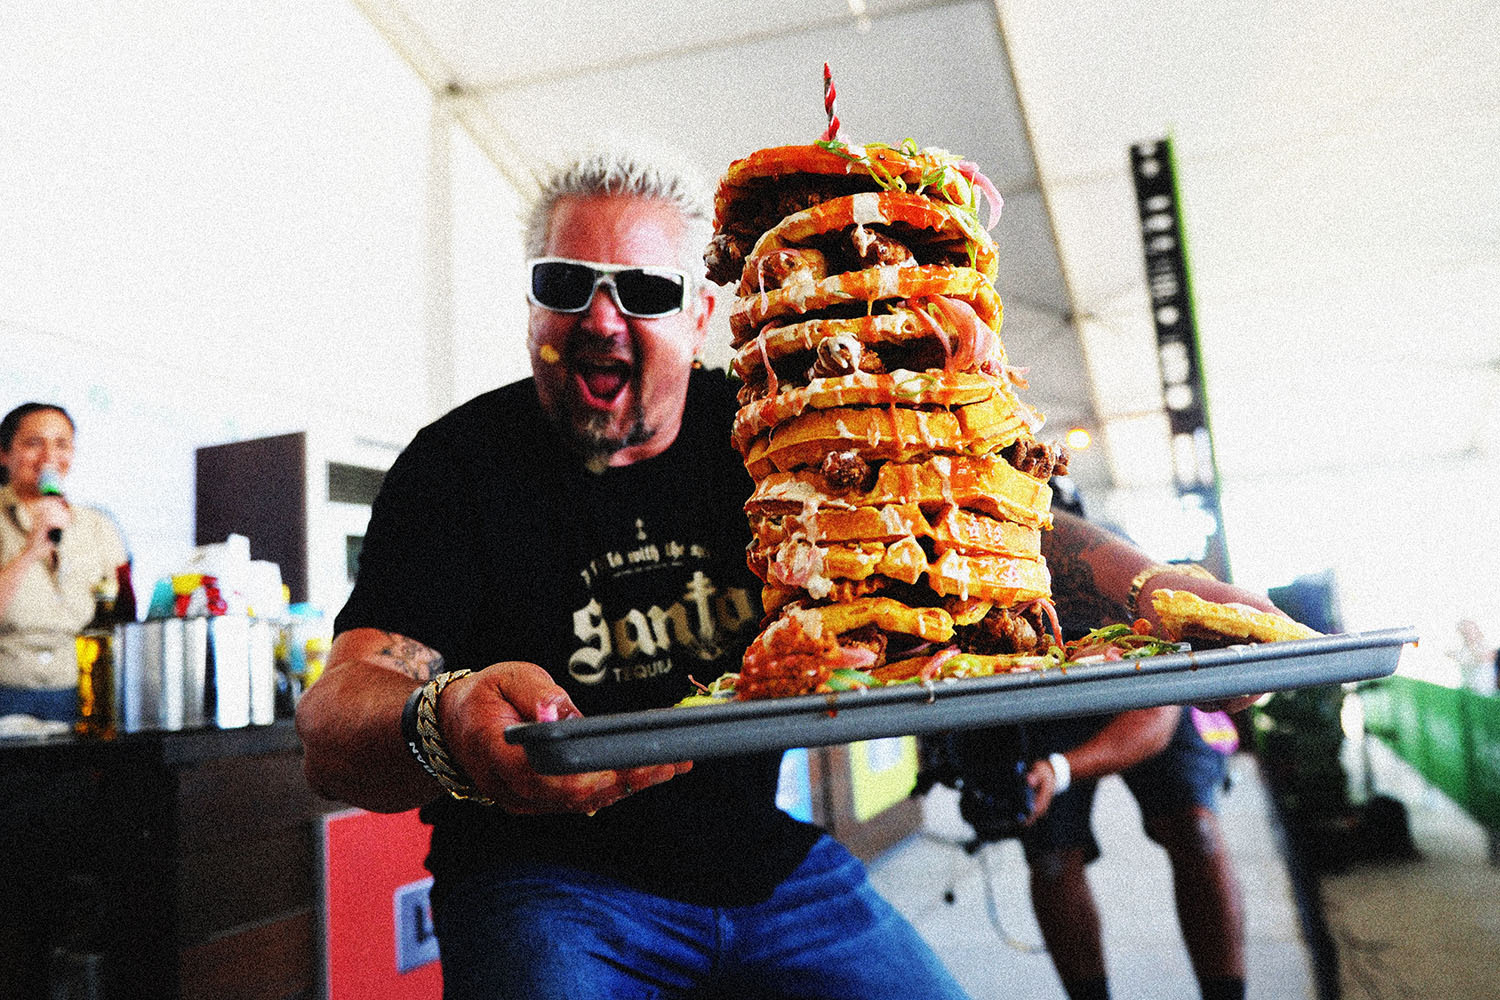 Guy Fieri doing his take on chicken and waffles at the South Beach Wine and Food Festival